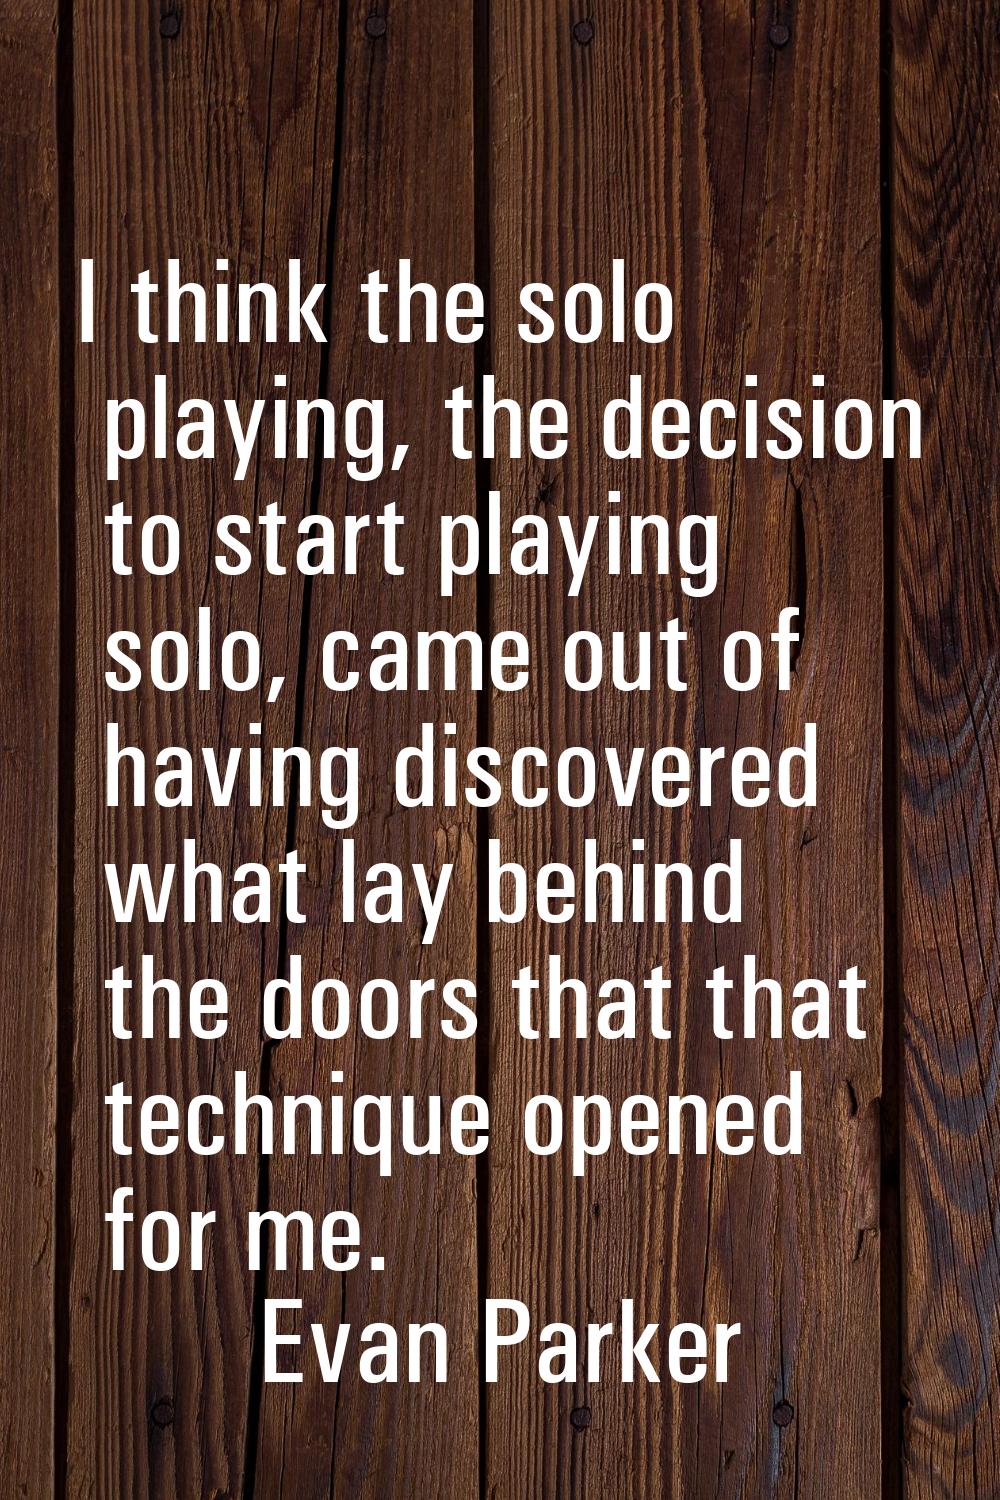 I think the solo playing, the decision to start playing solo, came out of having discovered what la